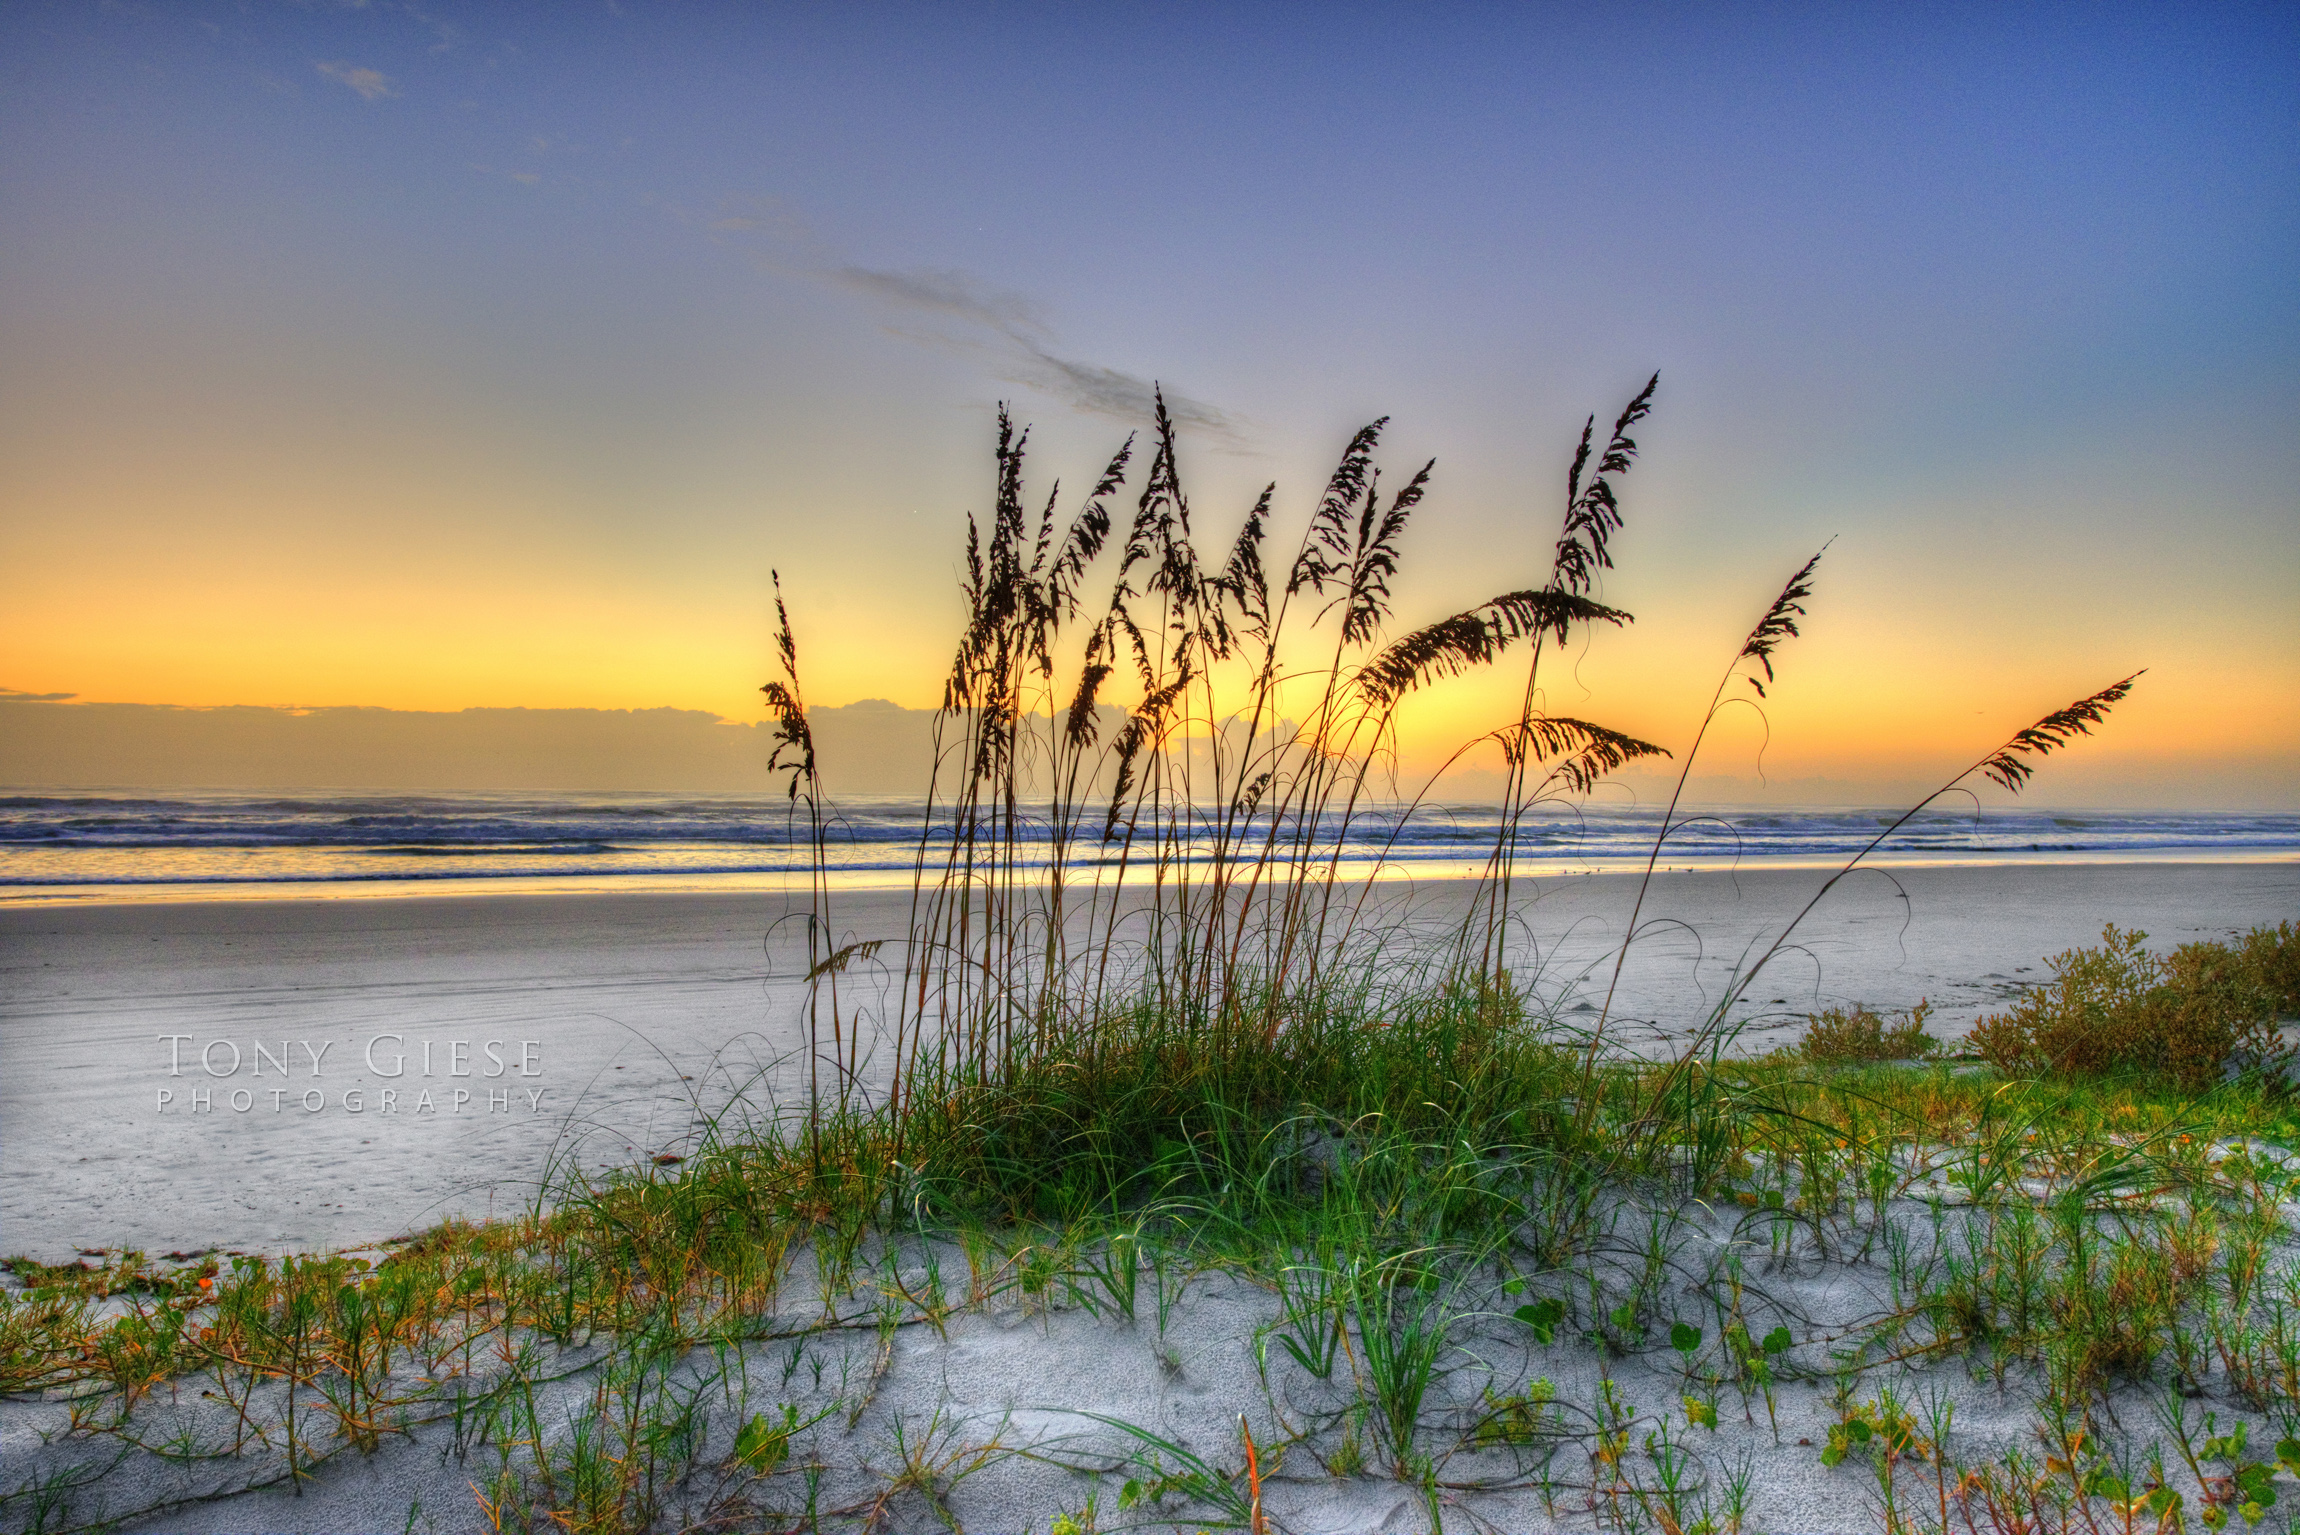 Florida beaches have a symbol, it’s the sea oat. Photography by Tony Giese.